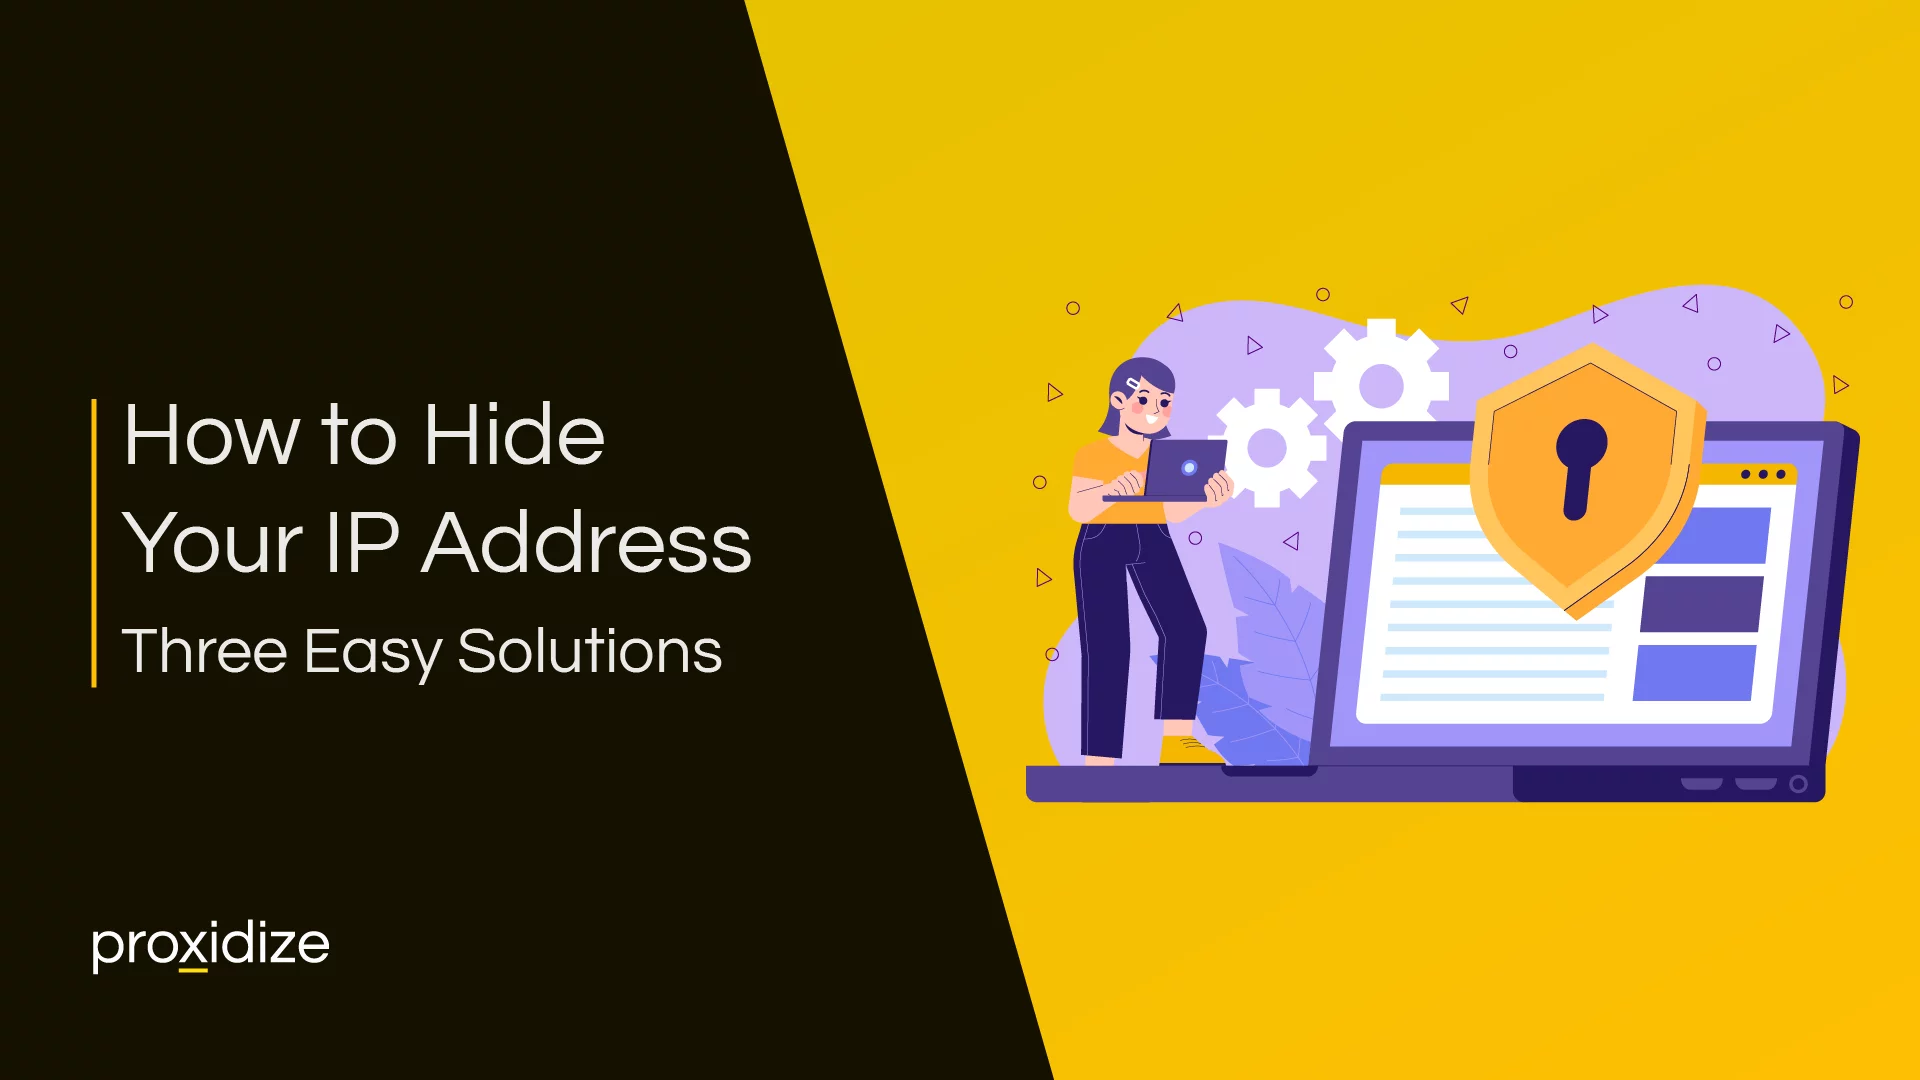 Hwo to Hide Your IP Address: 3 Easy Steps